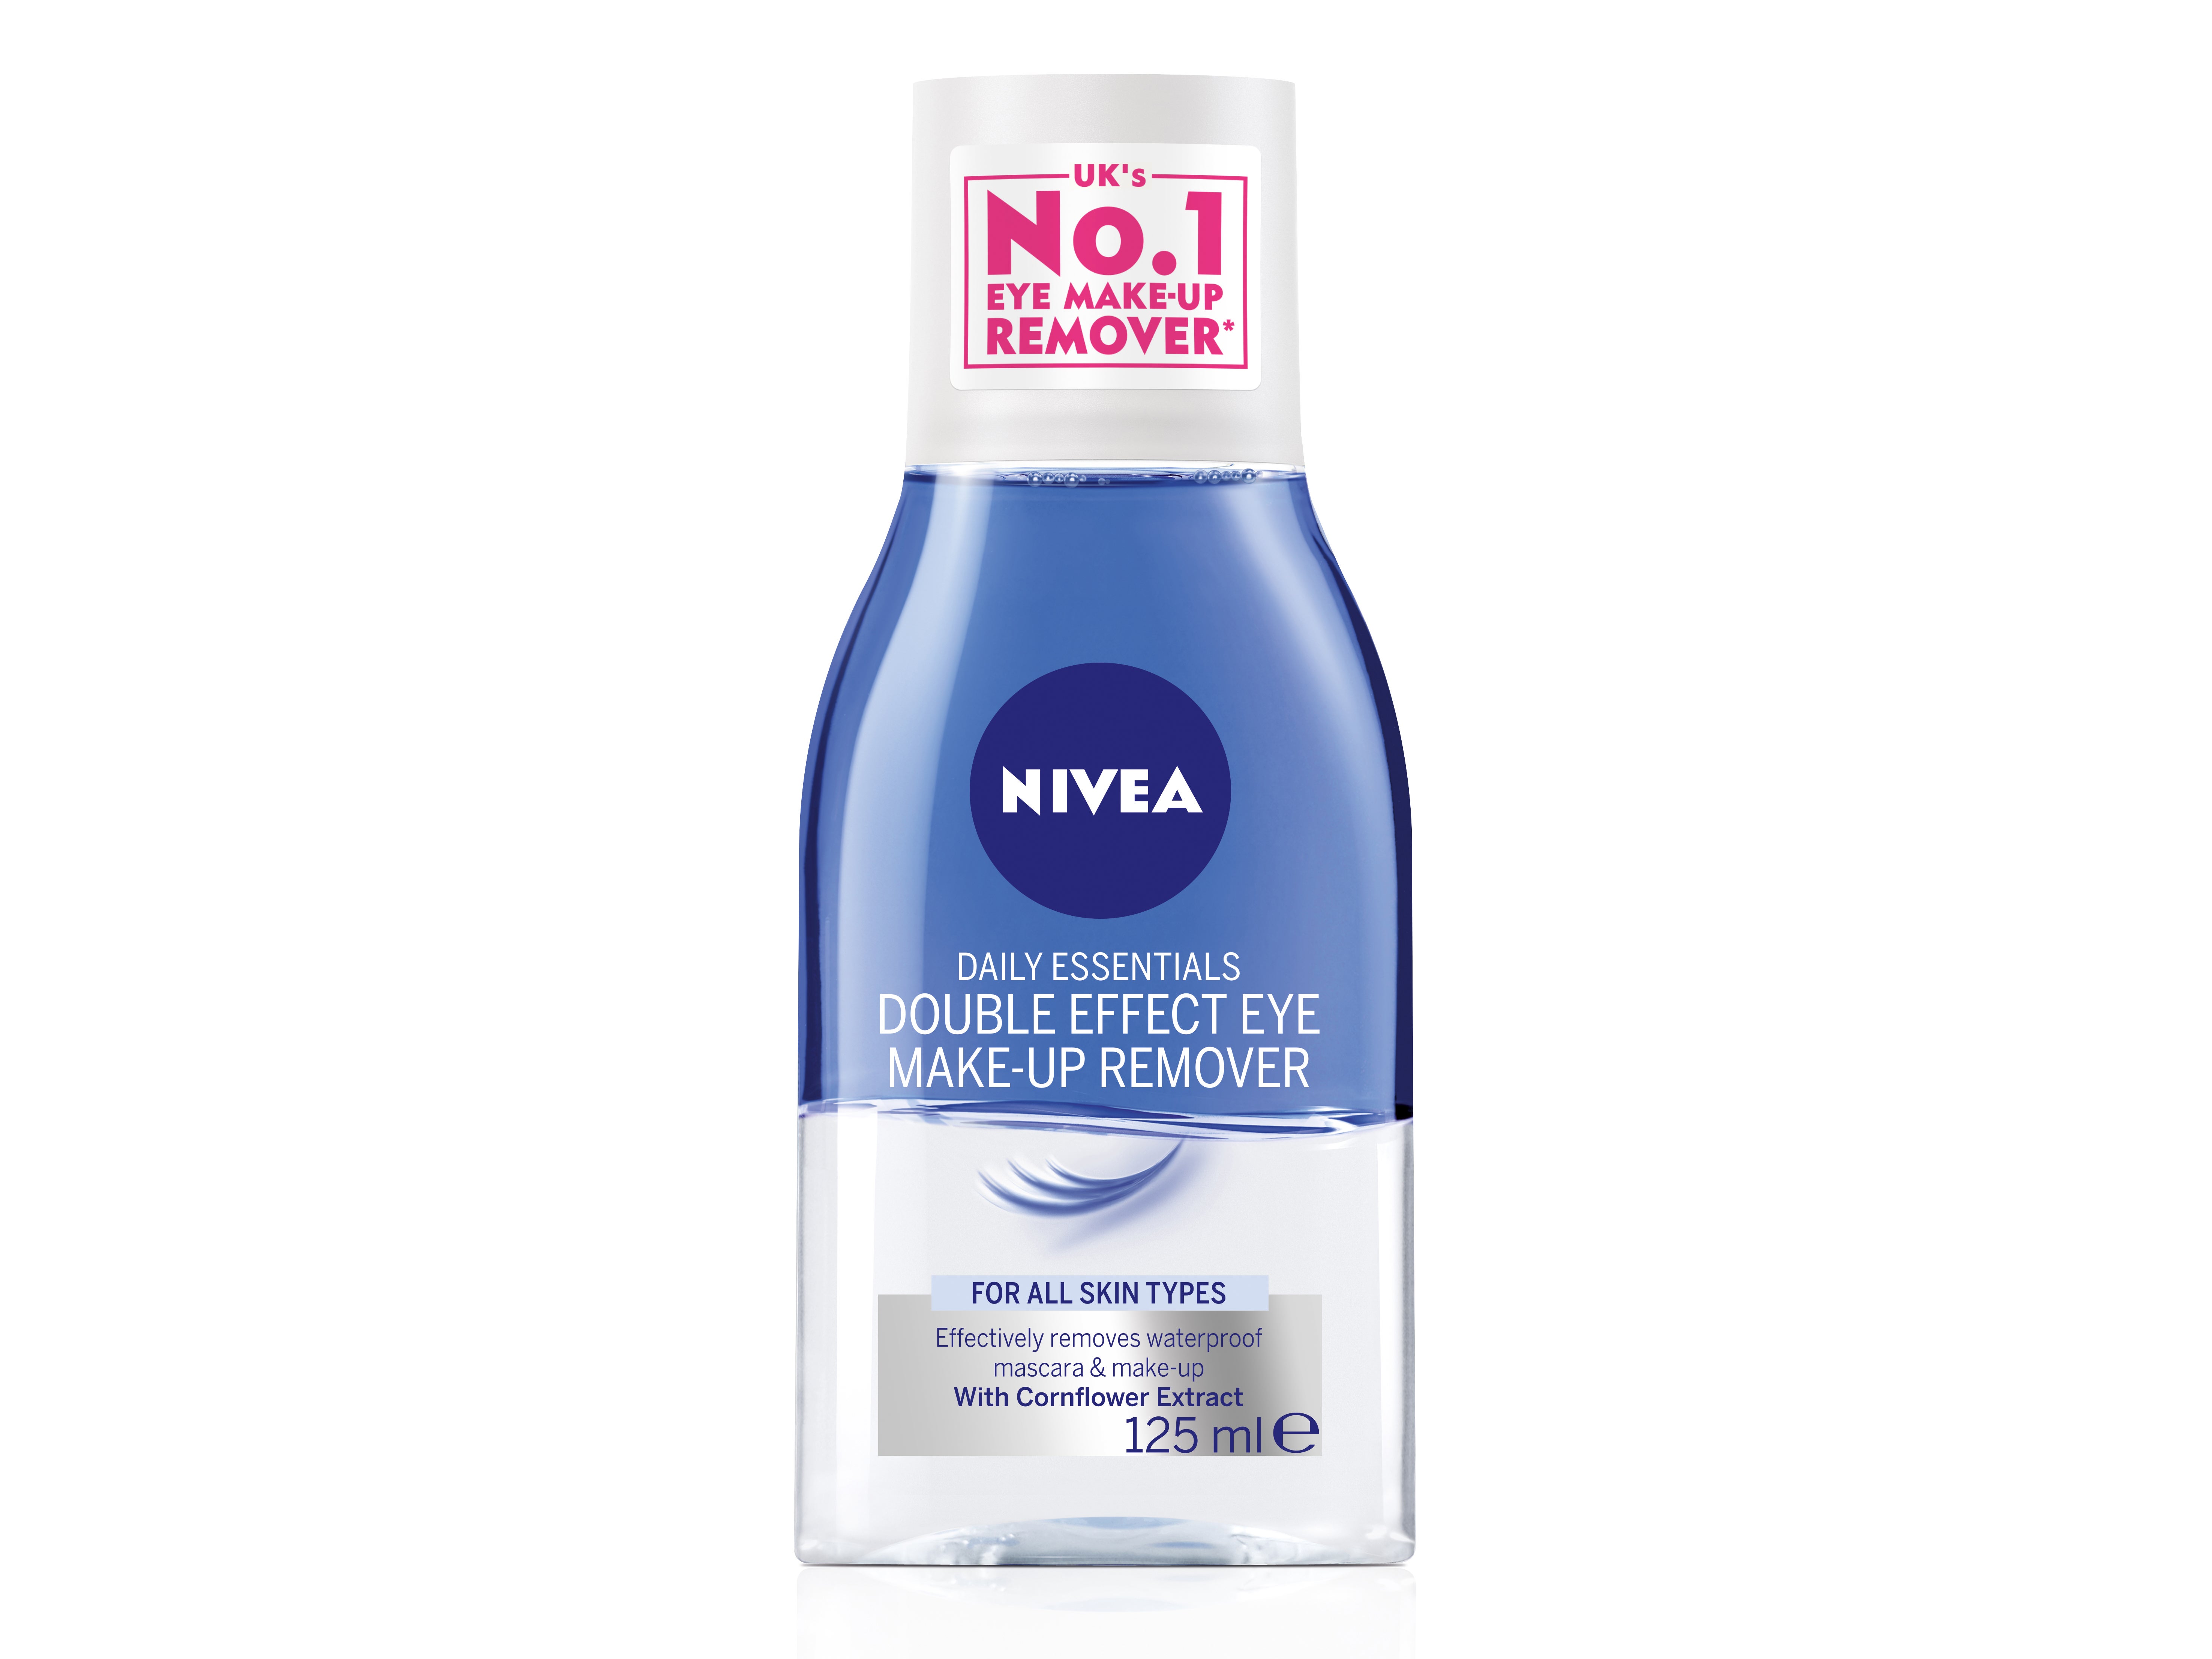 NIVEA Daily Essentials Double Effect Eye Make-Up Remover v2.jpg